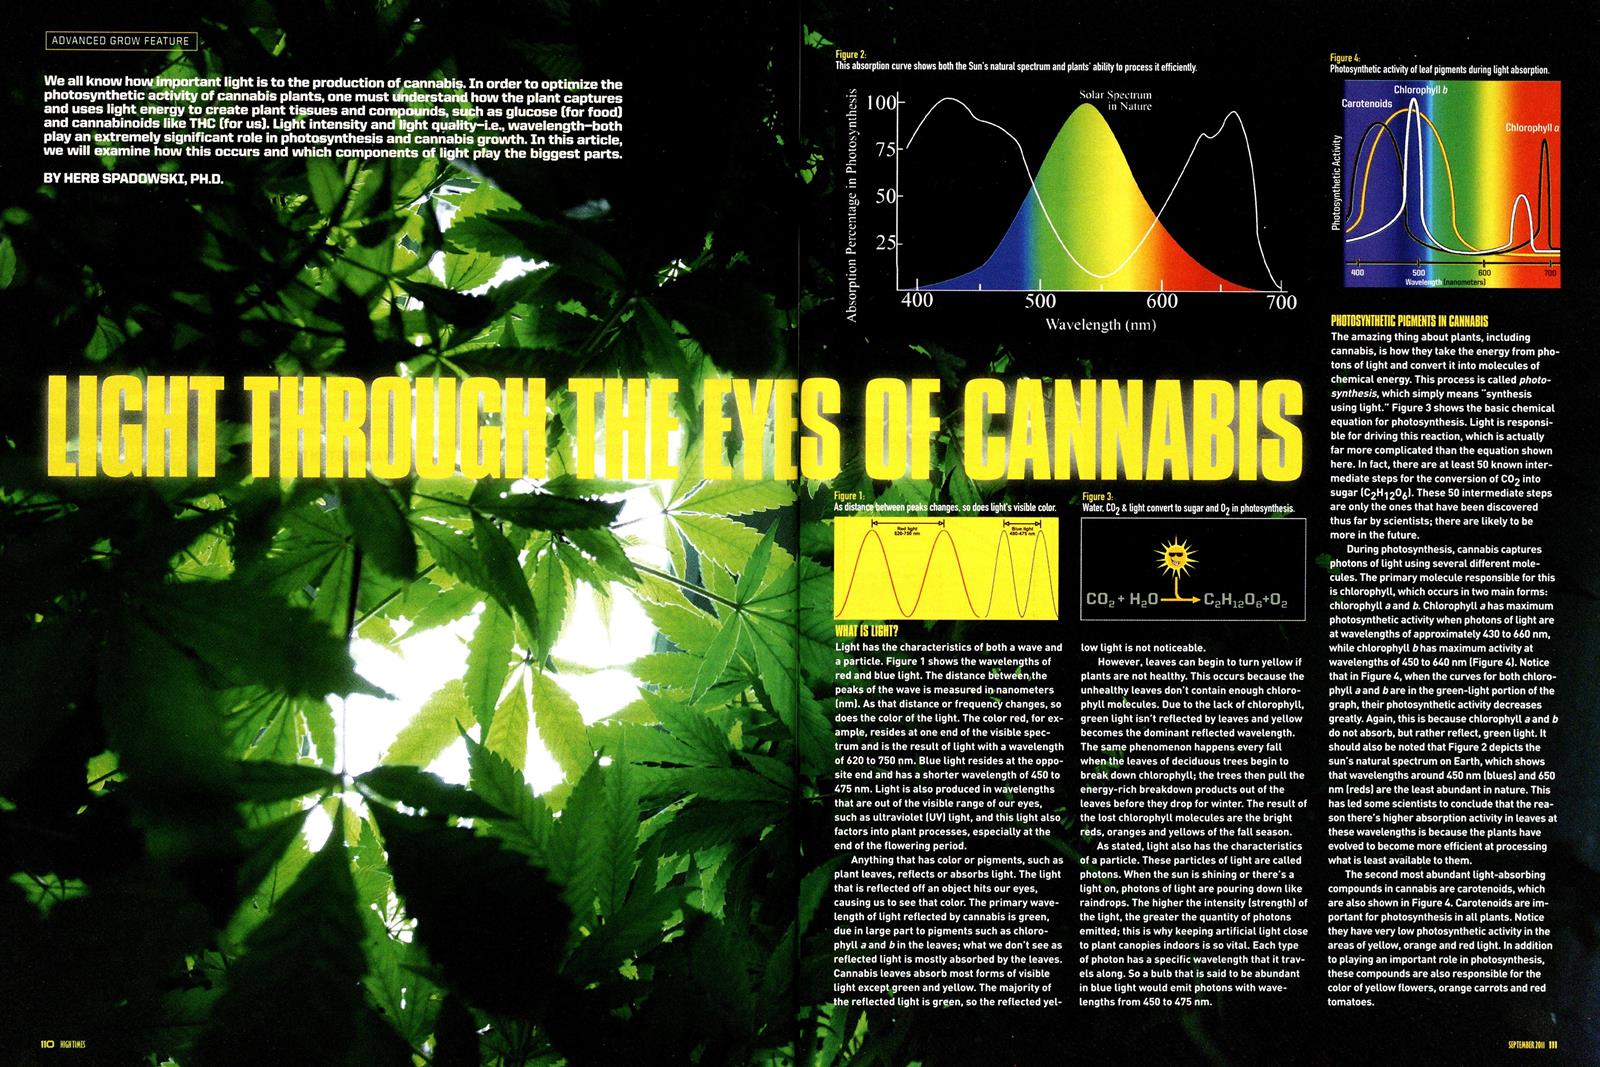 From the Archives: Light Through the Eyes of Cannabis (2011)